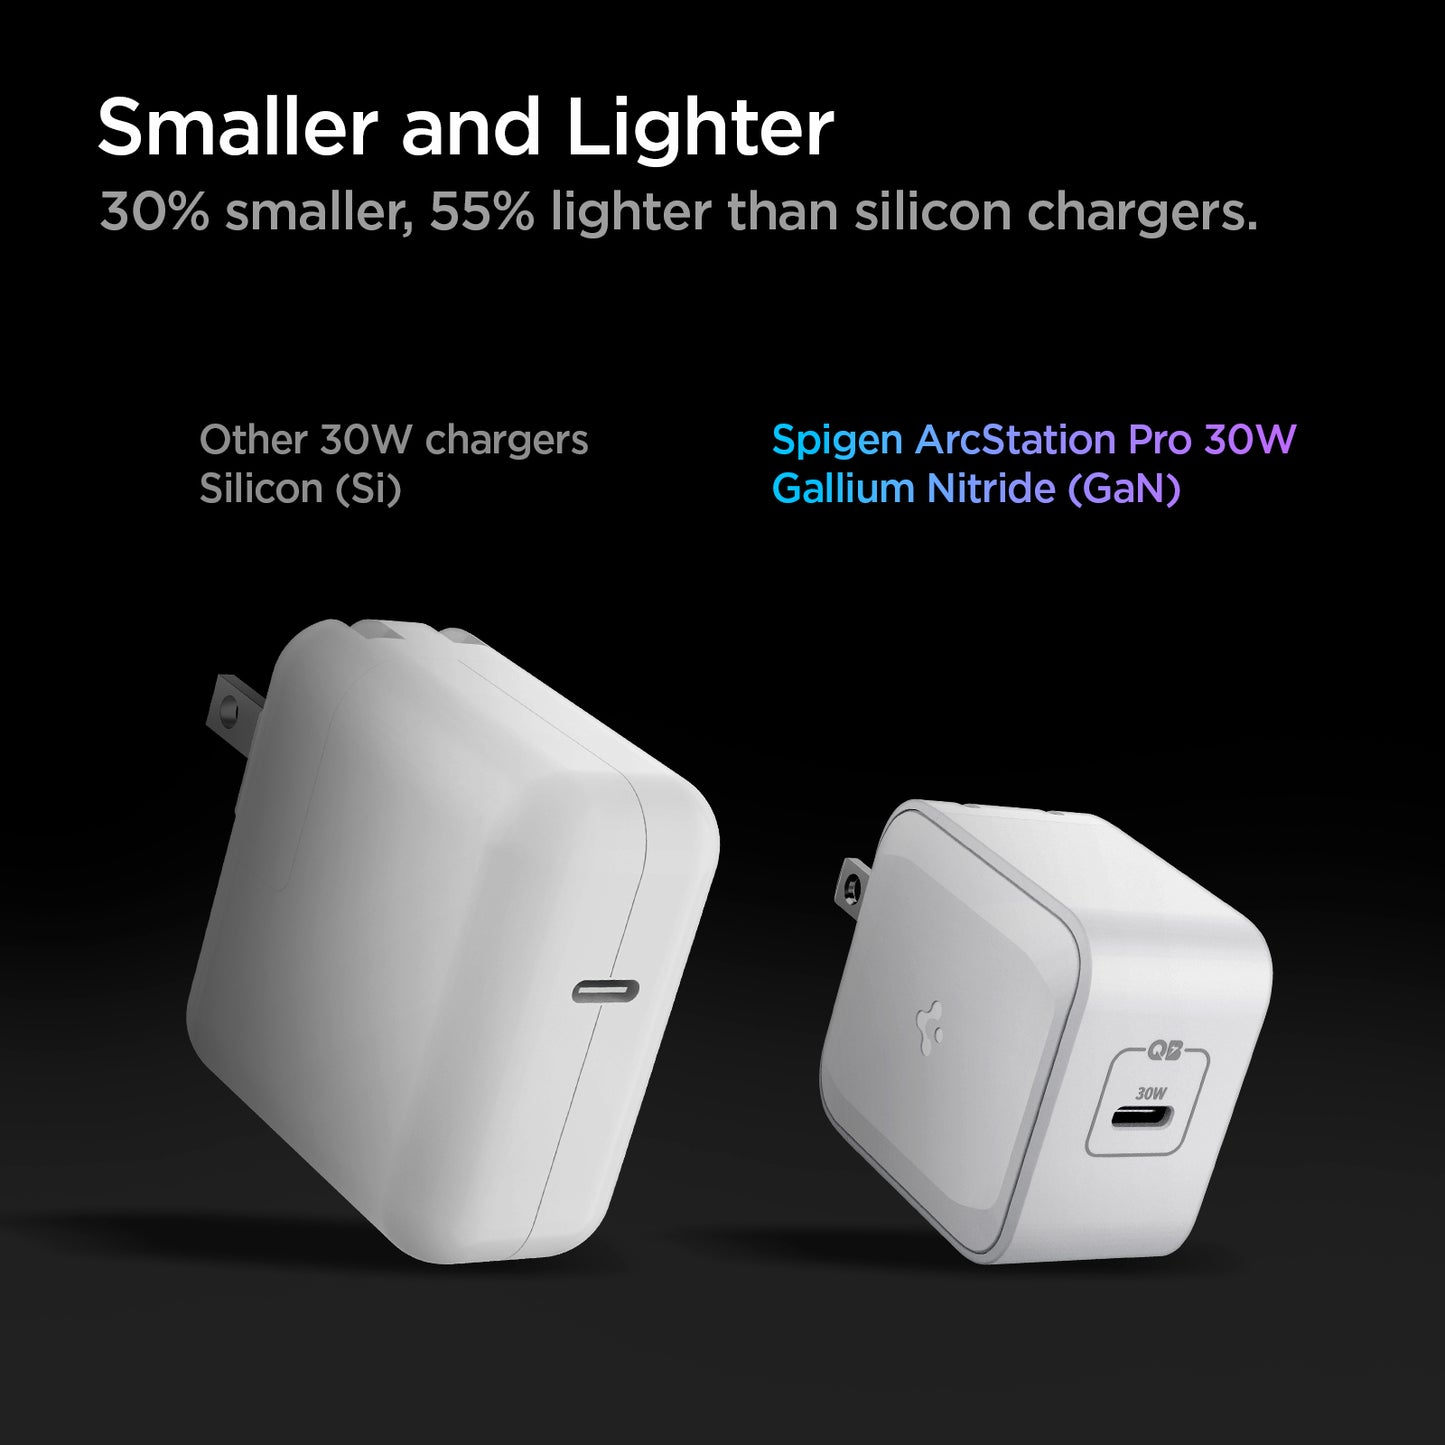 ACH02075 - ArcStation™ Pro GaN 30W Wall Charger PE2008 in White showing the Smaller and Lighter, 30% smaller, and 55% lighter than silicon chargers. Other charger (30W), Spigen SAP (GaN) 30W